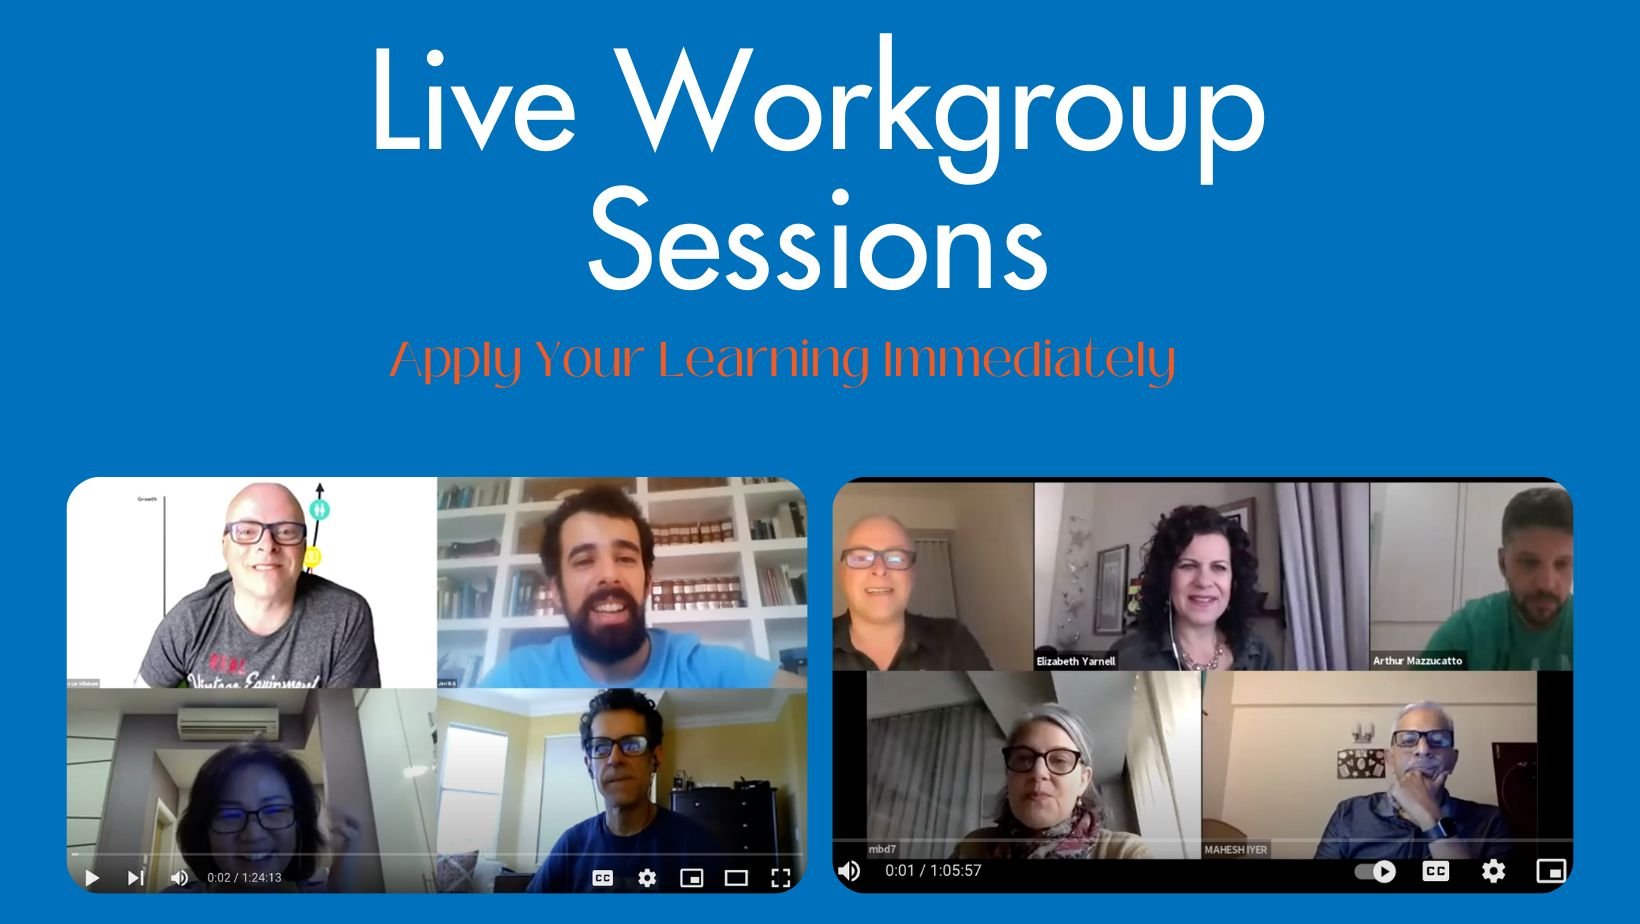 Live Workgroup Sessions